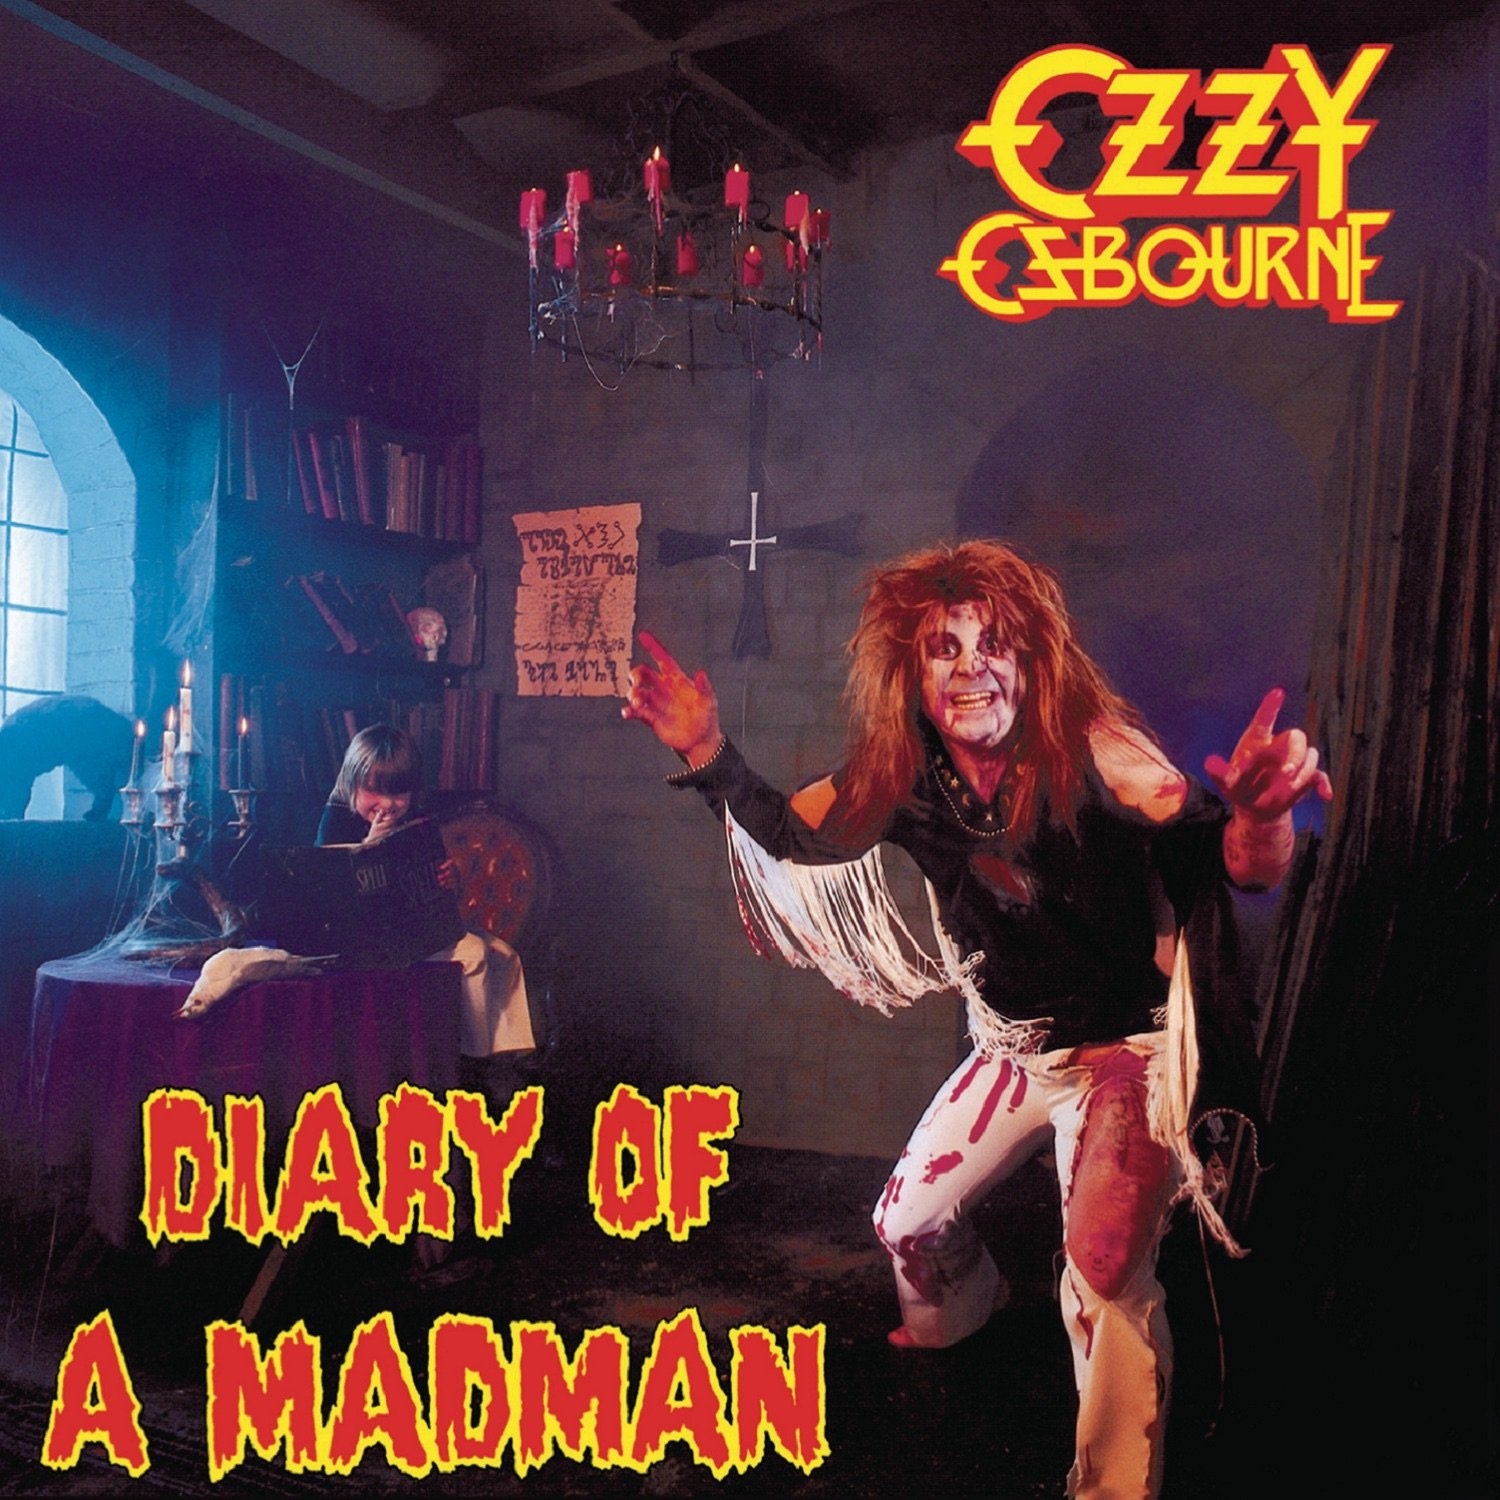 Металл Sony Osbourne, Ozzy - Diary of a Madman (40th anniversary) (Limited Marbled Vinyl) pearl diary chiffon blouse bow tie front ruffle neckline and sleeve summer drapey sheer blouse beach casual chiffon cover up